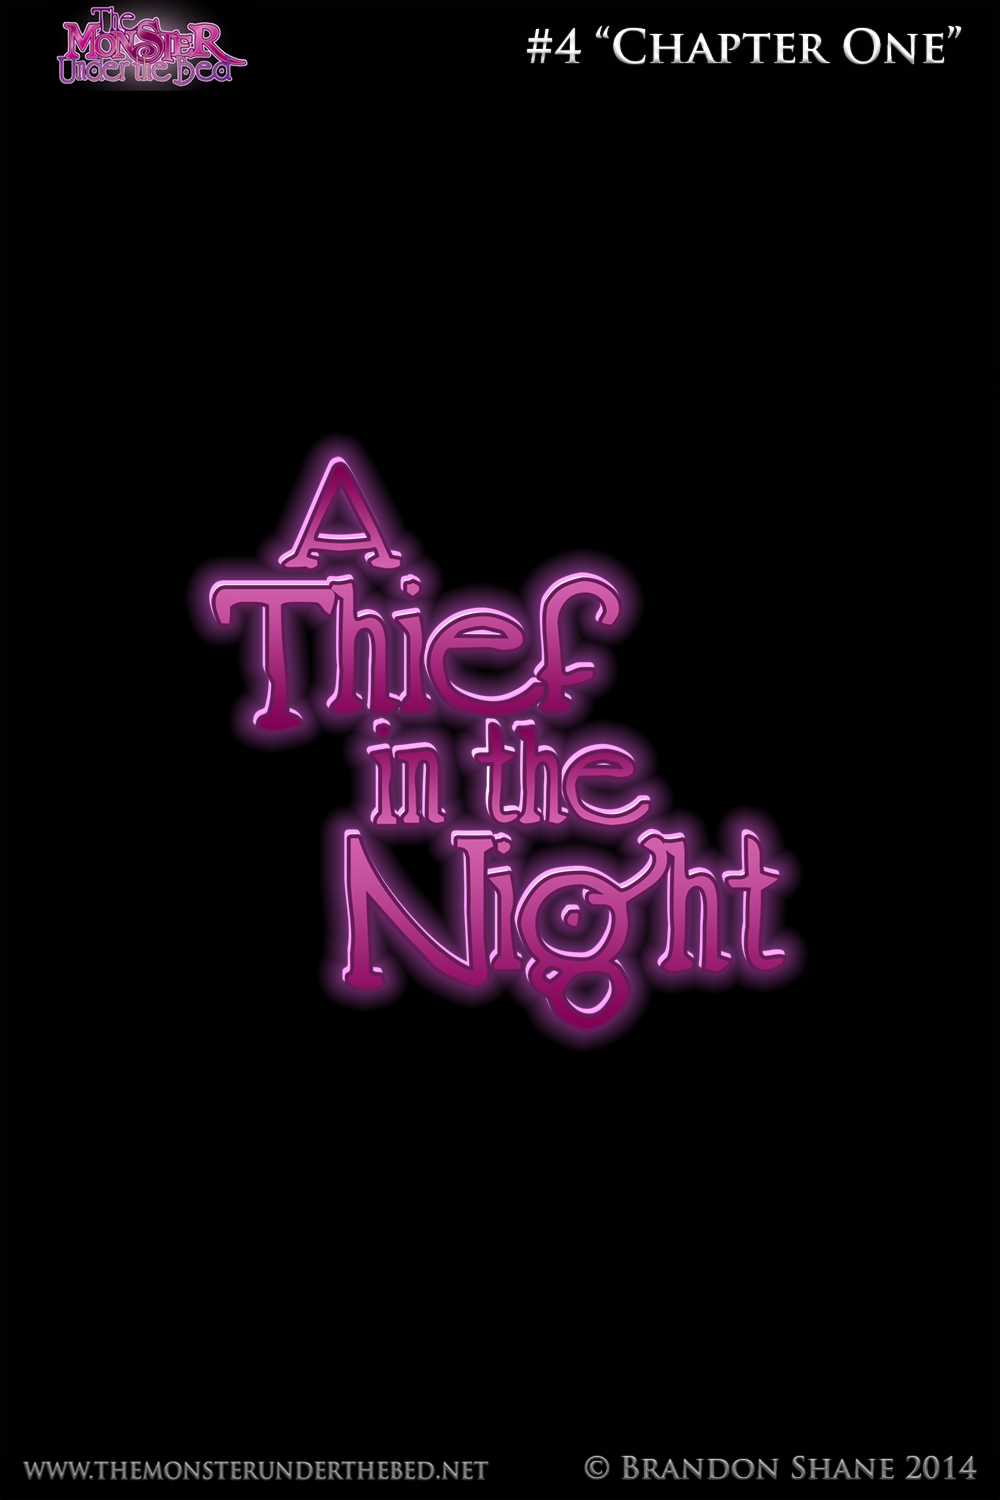 #4 “A Thief in the Night”